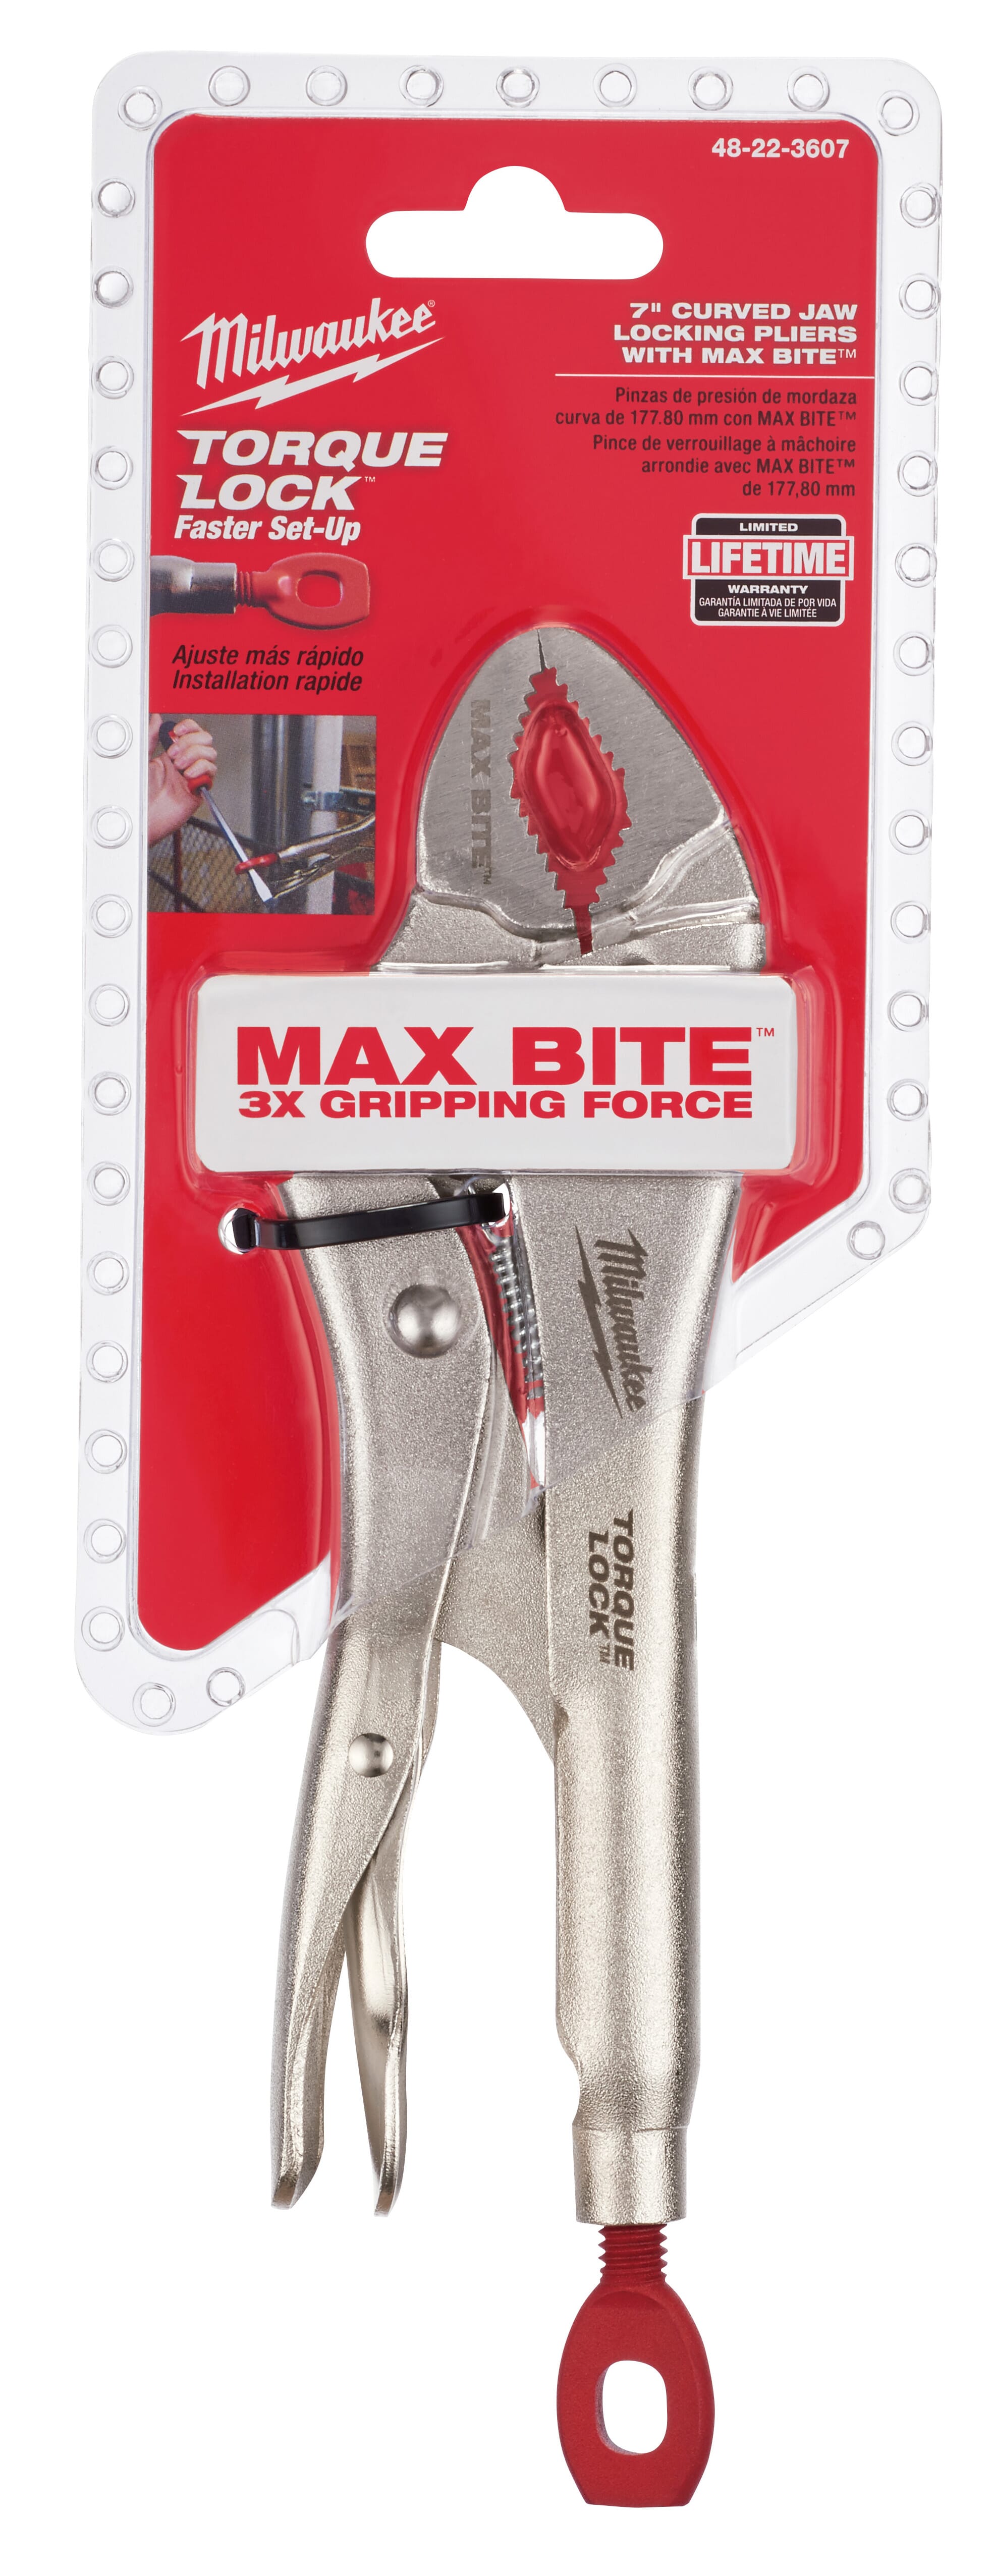 Milwaukee® TORQUE LOCK™ MAXBITE™ 48-22-3607 1-Handed Lever Standard Locking Plier, 1-1/2 in Nominal, 1-3/32 in L x 29/64 in W x 29/64 in THK Alloy Steel Curved Jaw, 7 in OAL, ASME Specified